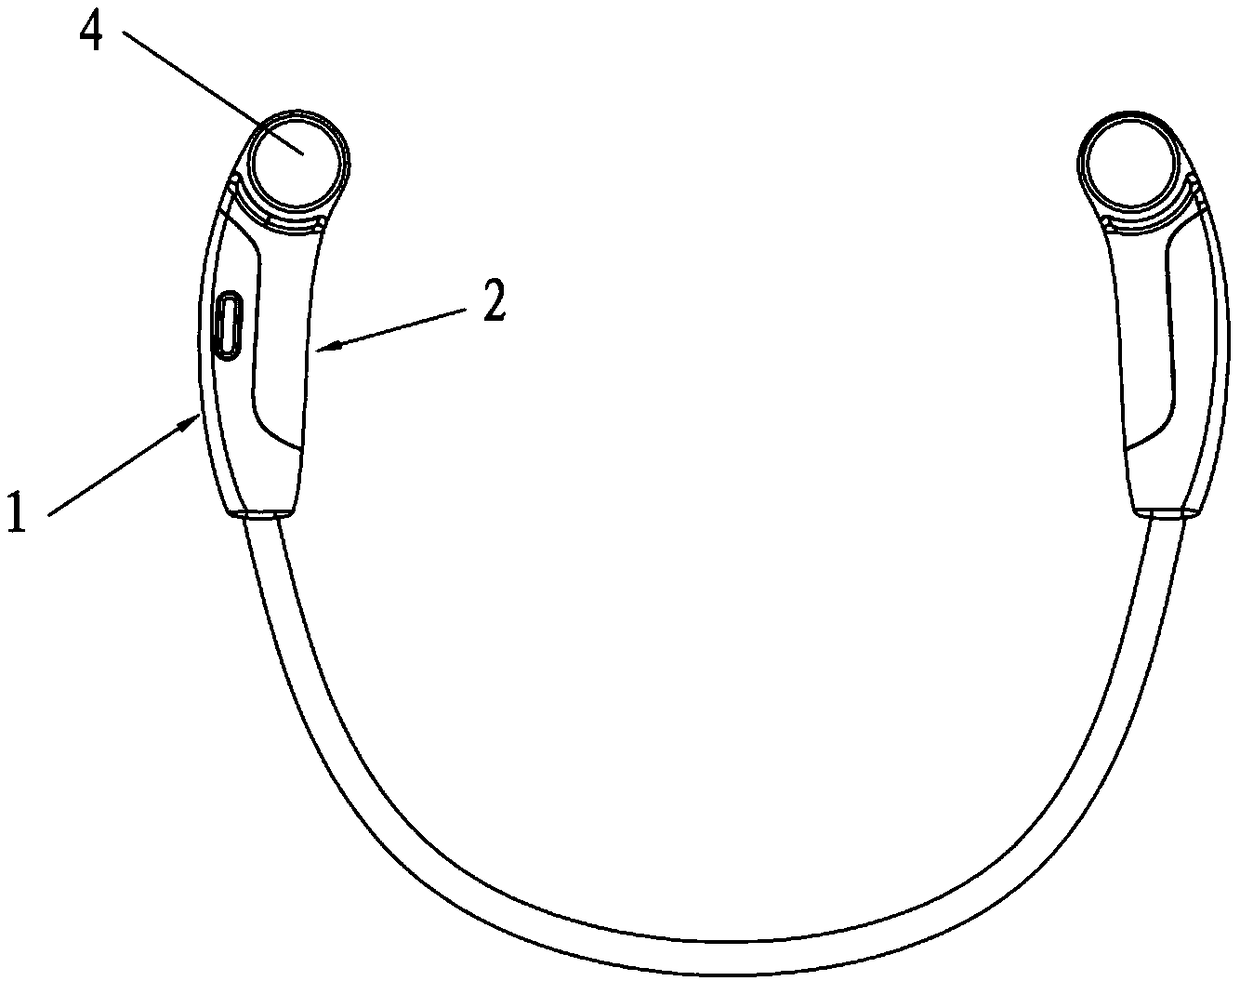 Watch lug connector, watch strap and wearing equipment